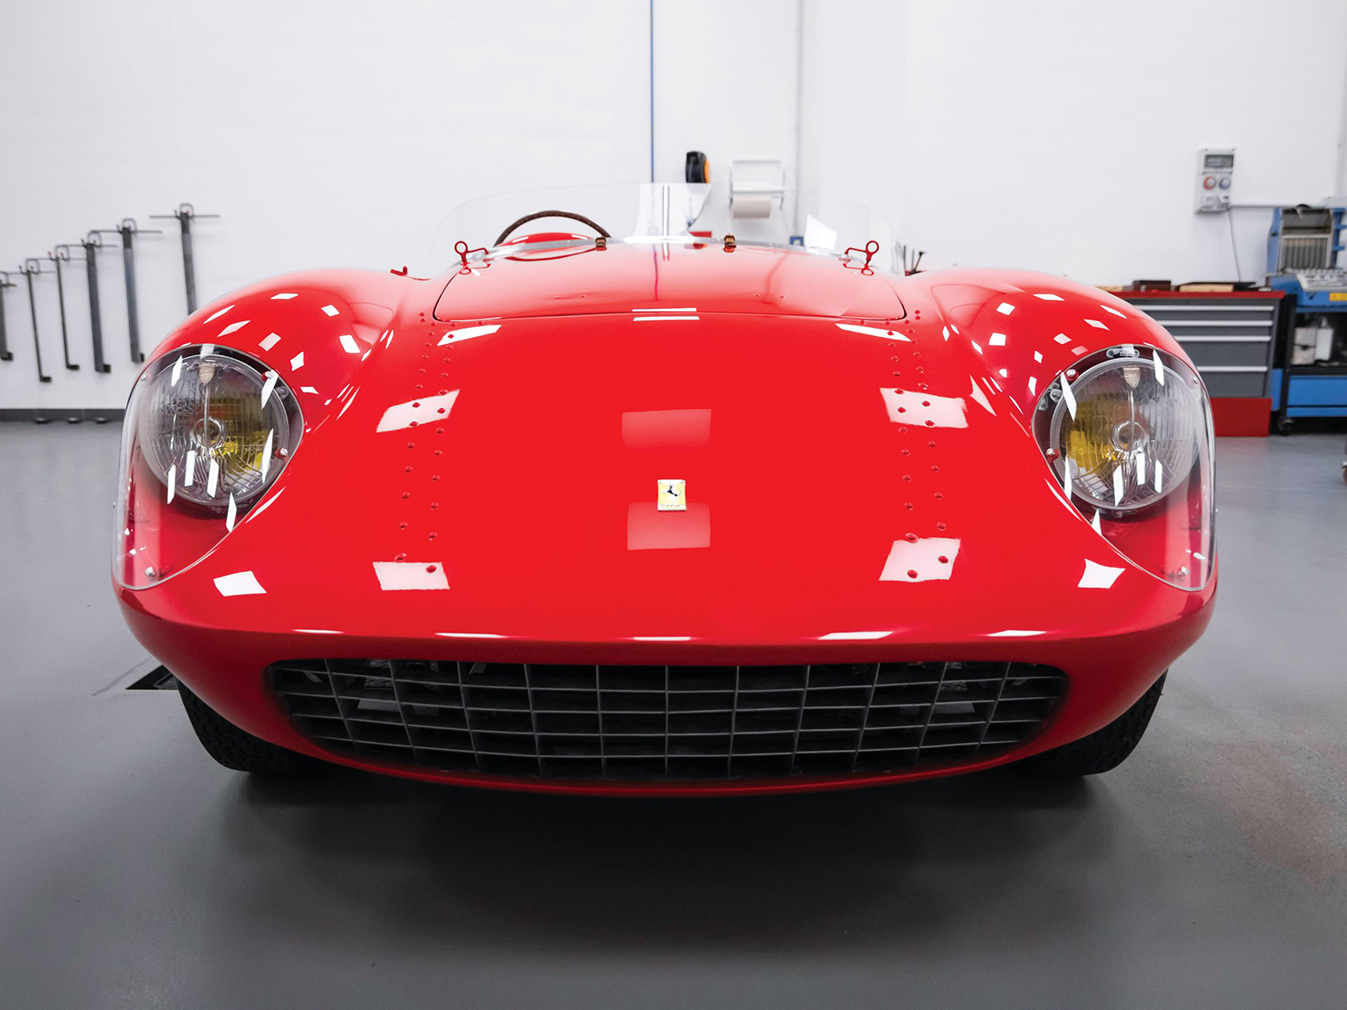 Ultra-rare Ferrari 500 Mondial Spider by Pininfarina is up for auction